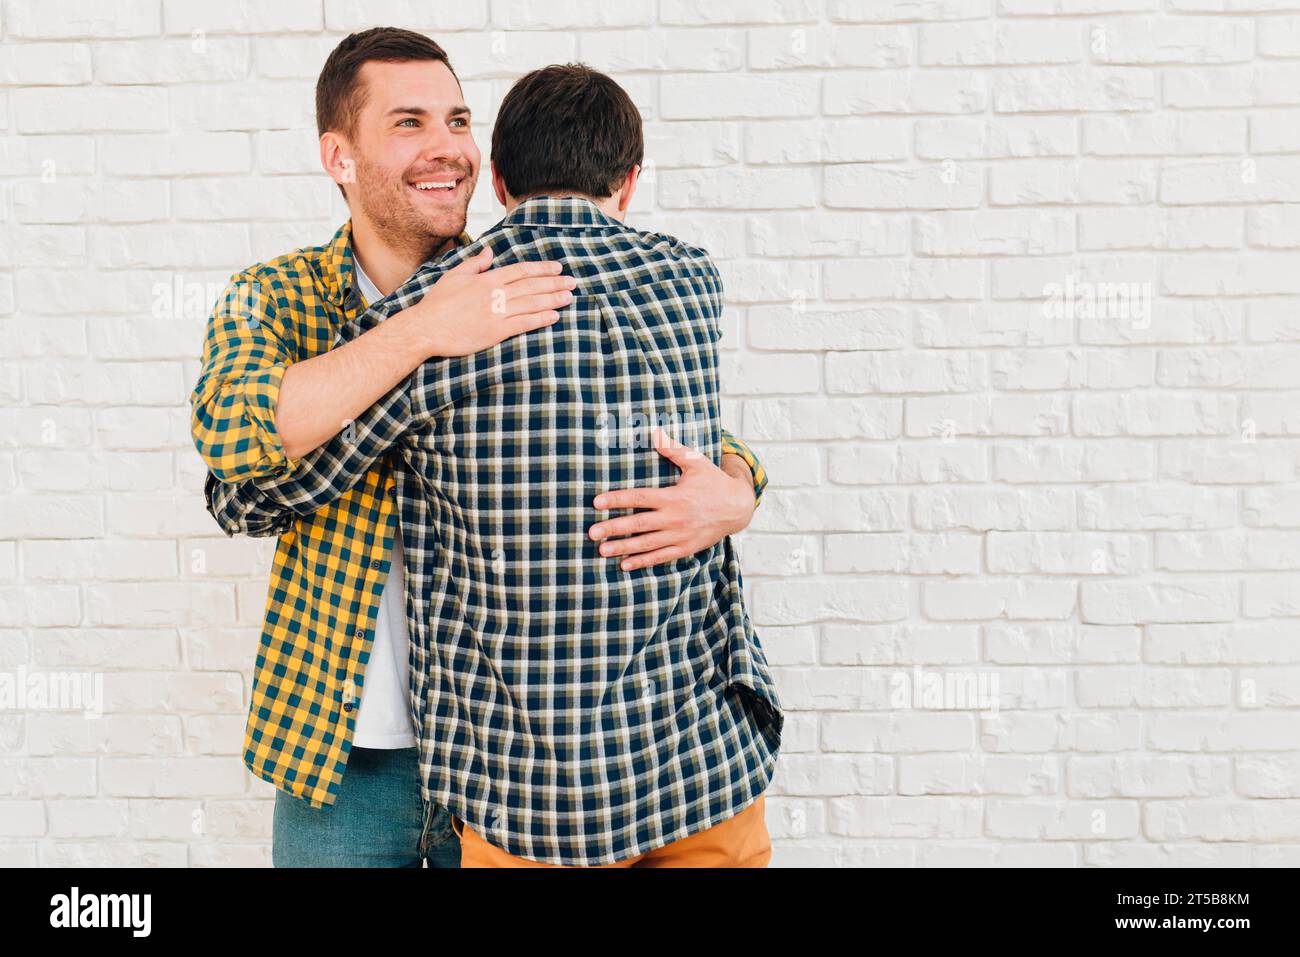 Smiling portrait man giving hug his friend against white brick wall Stock Photo